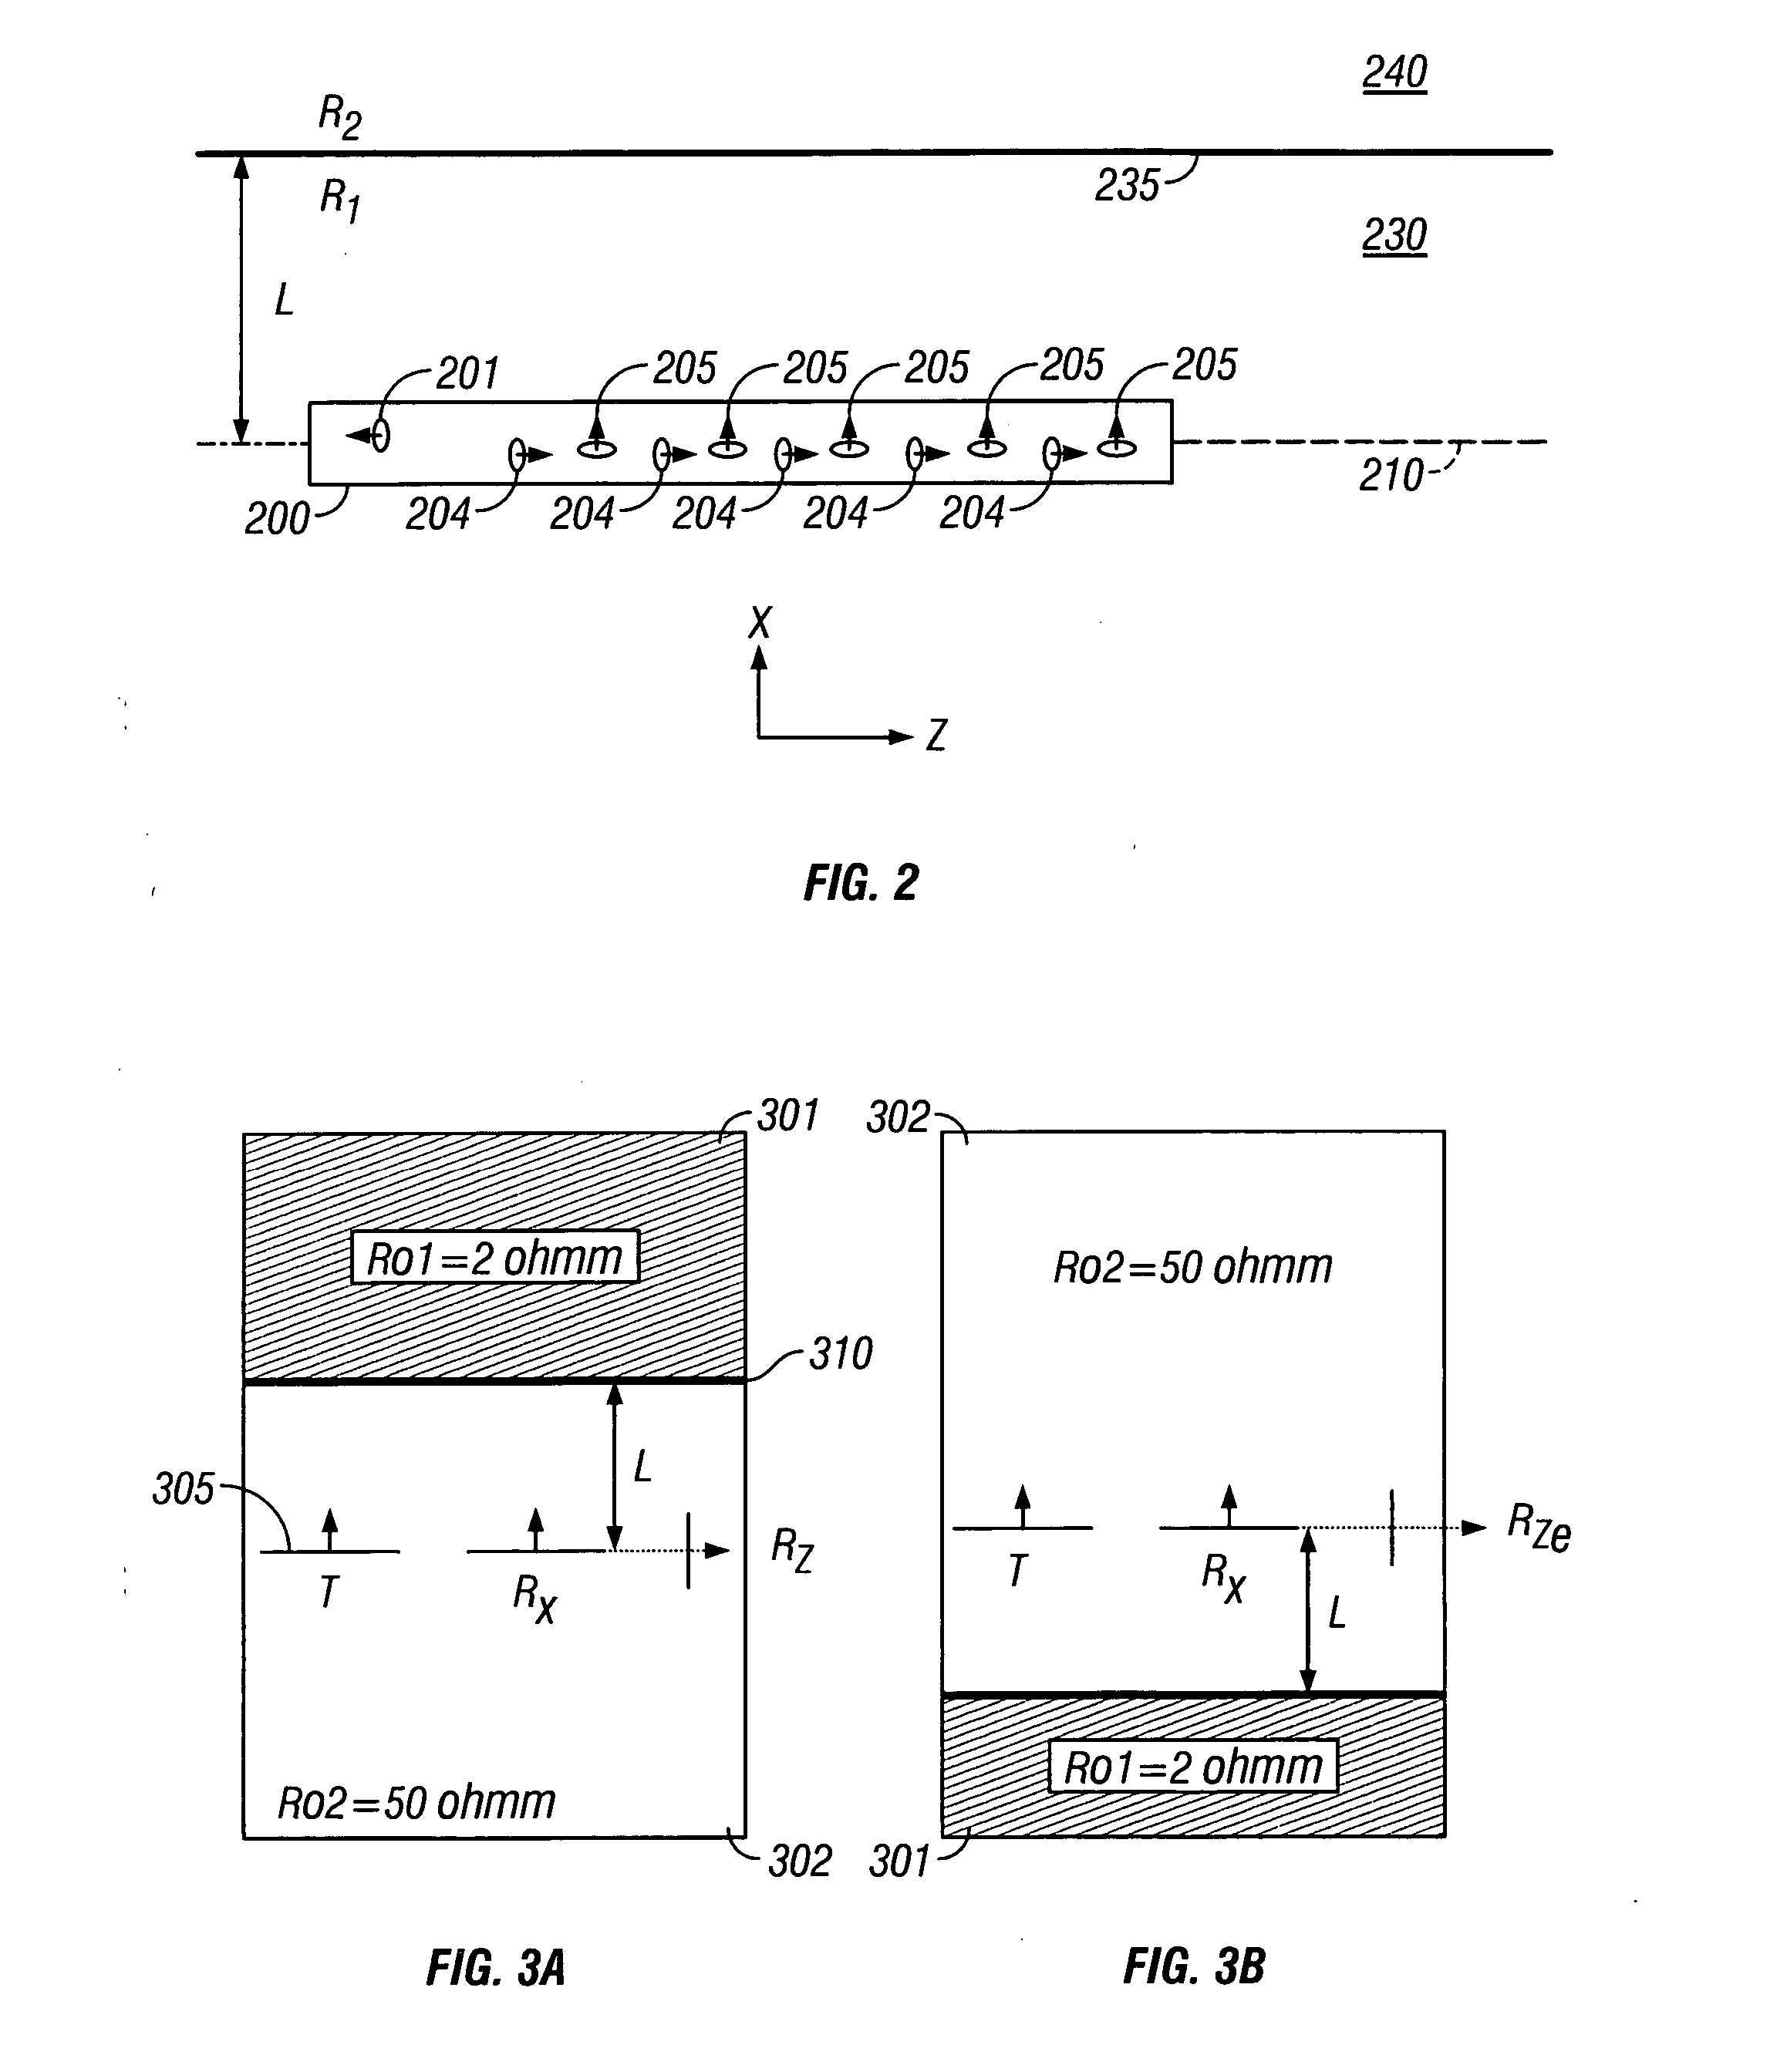 Method for measuring transient electromagnetic components to perform deep geosteering while drilling